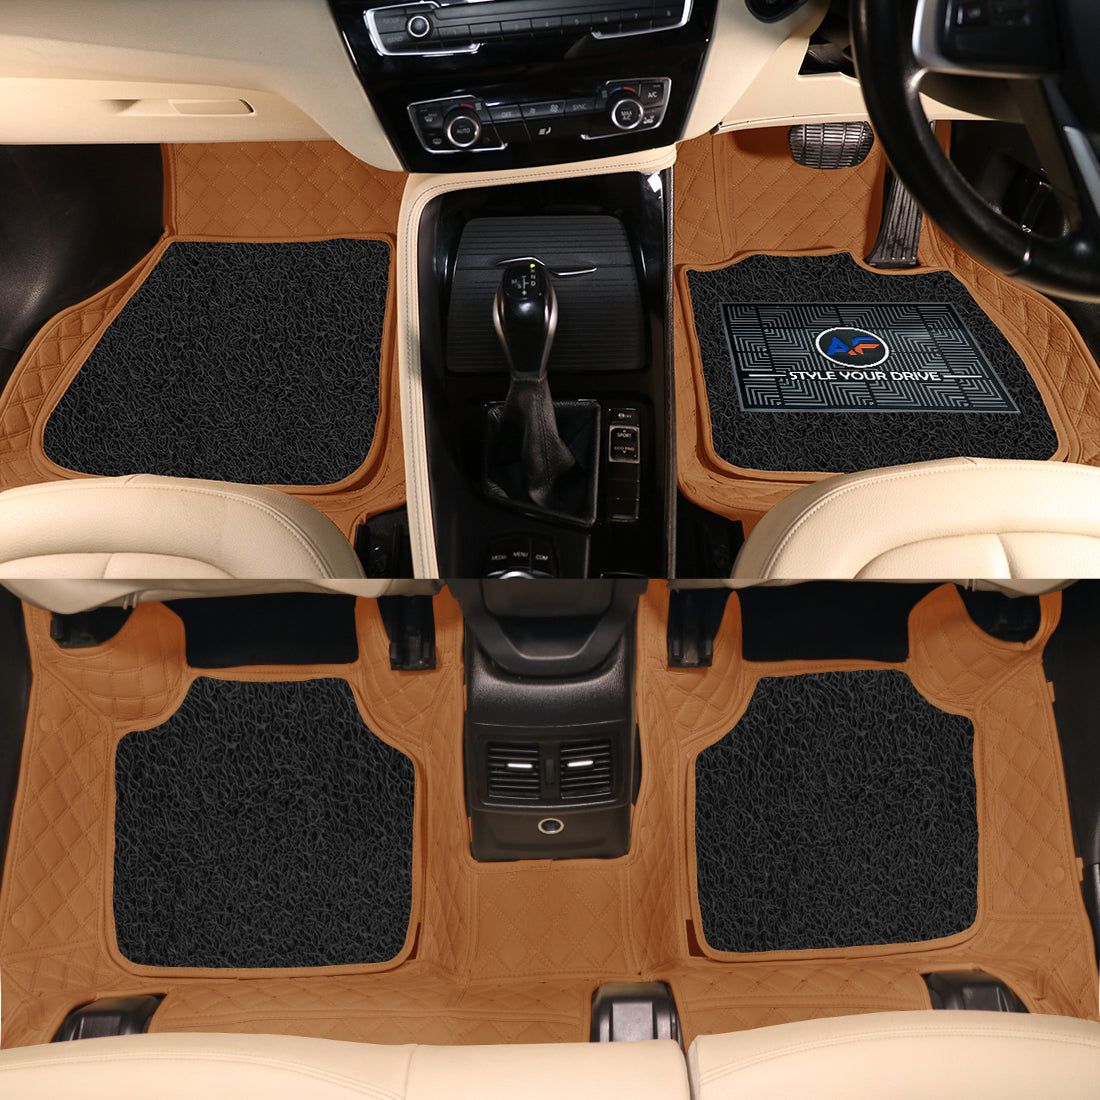 Volkswagen T-Roc 2020 7D Luxury Car Mat, All Weather Proof, Anti-Skid, 100% Waterproof & Odorless with Unique Diamond Fish Design (24mm Luxury PU Leather, 2 Rows)